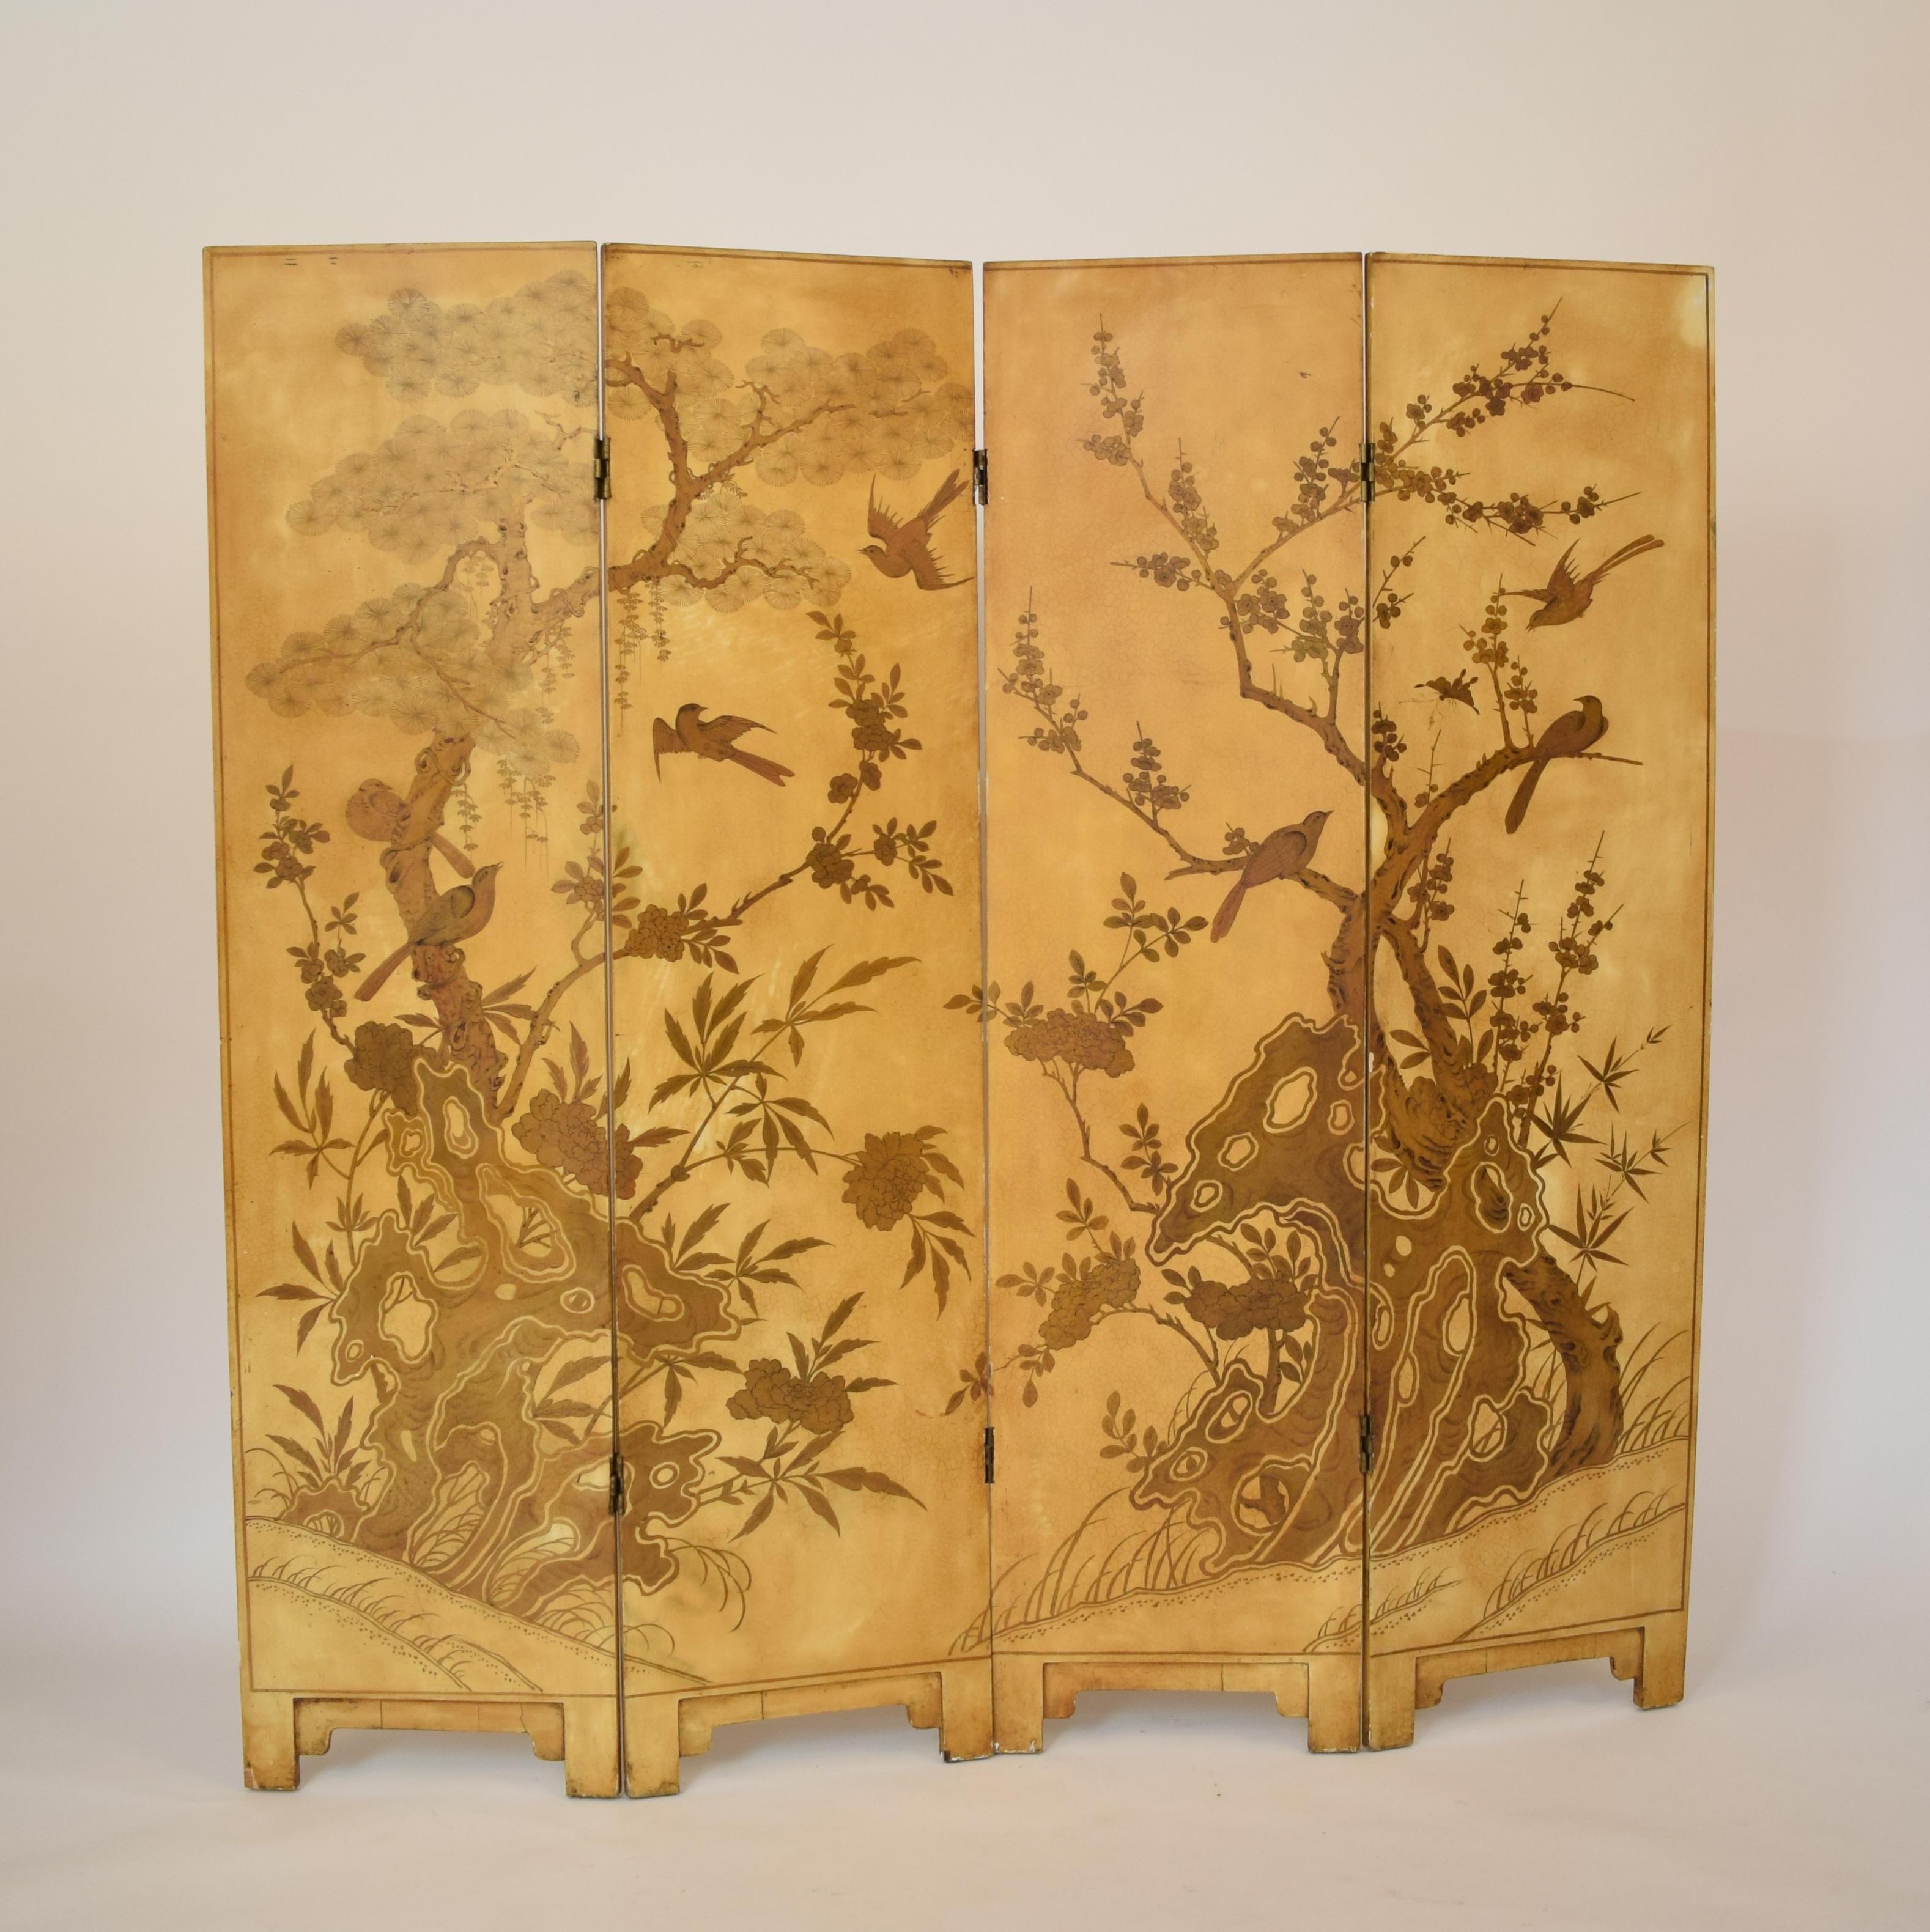 This beautiful hand painted French 19th century chinoiserie lacquer four-panel screen, Paravent contains its original surface and has a great patina.